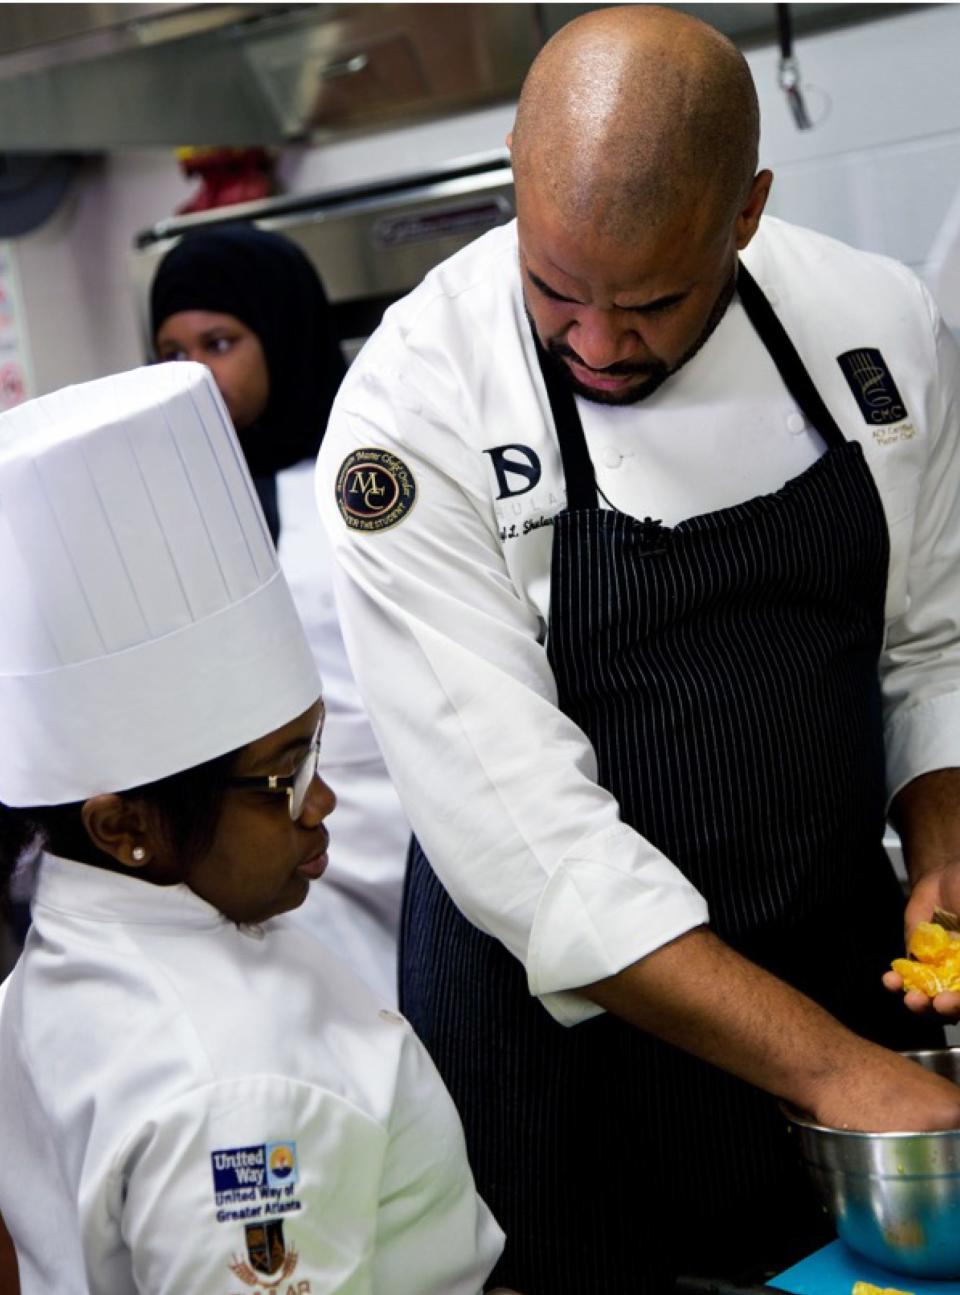 Certified master chef Daryl Shular, shown working with a student, leads the Shular Institute. The group is planning Brigade MKE culinary classes, starting with a boot camp-type session for 14- to 18-year-olds.